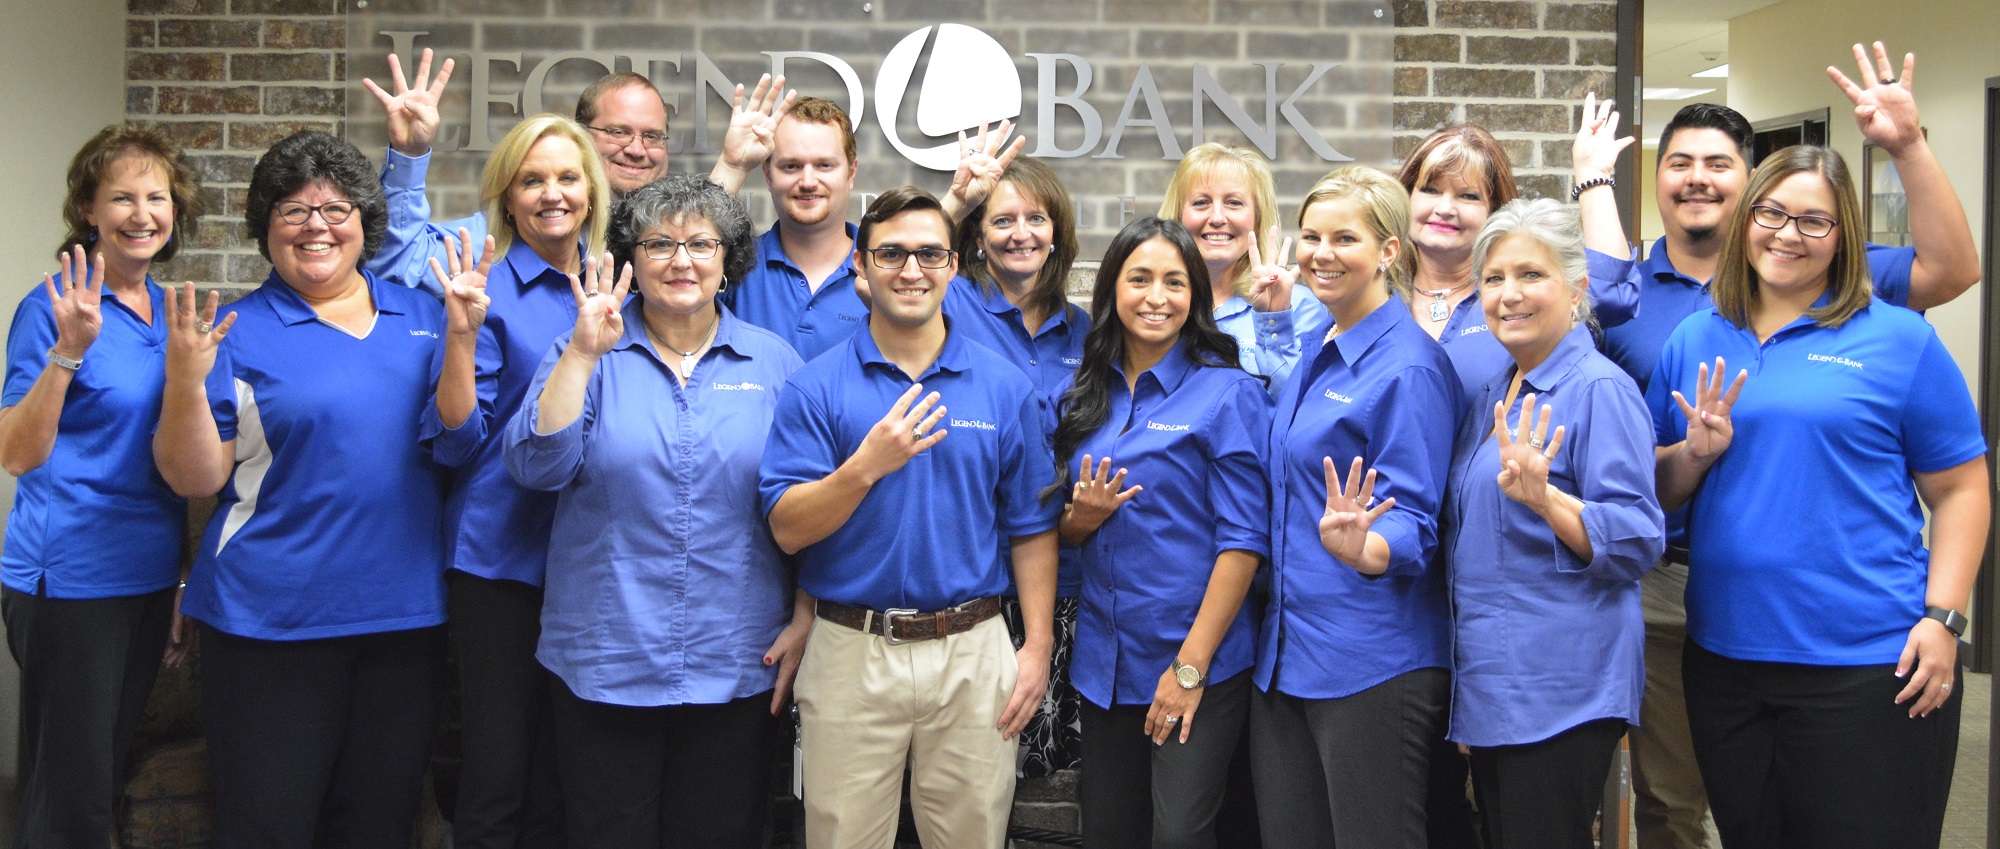 Photo of Legend Bank employees holding up 4 fingers to celebrate Legend Bank being named 4th Best Bank to Work For